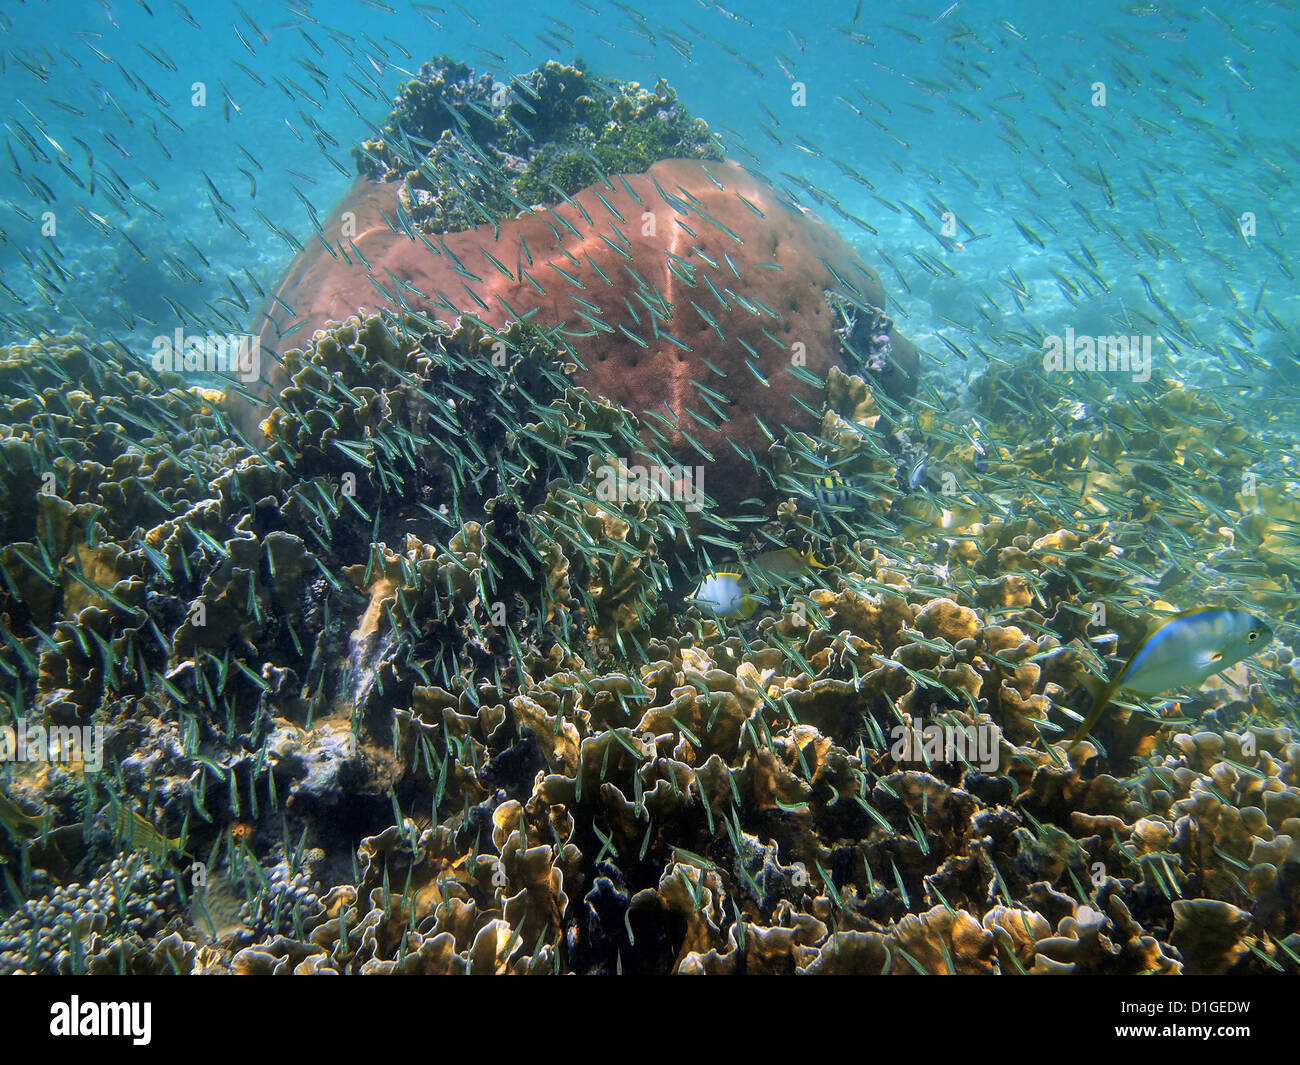 Coral reef with school of small tropical fish in the Caribbean sea Stock Photo